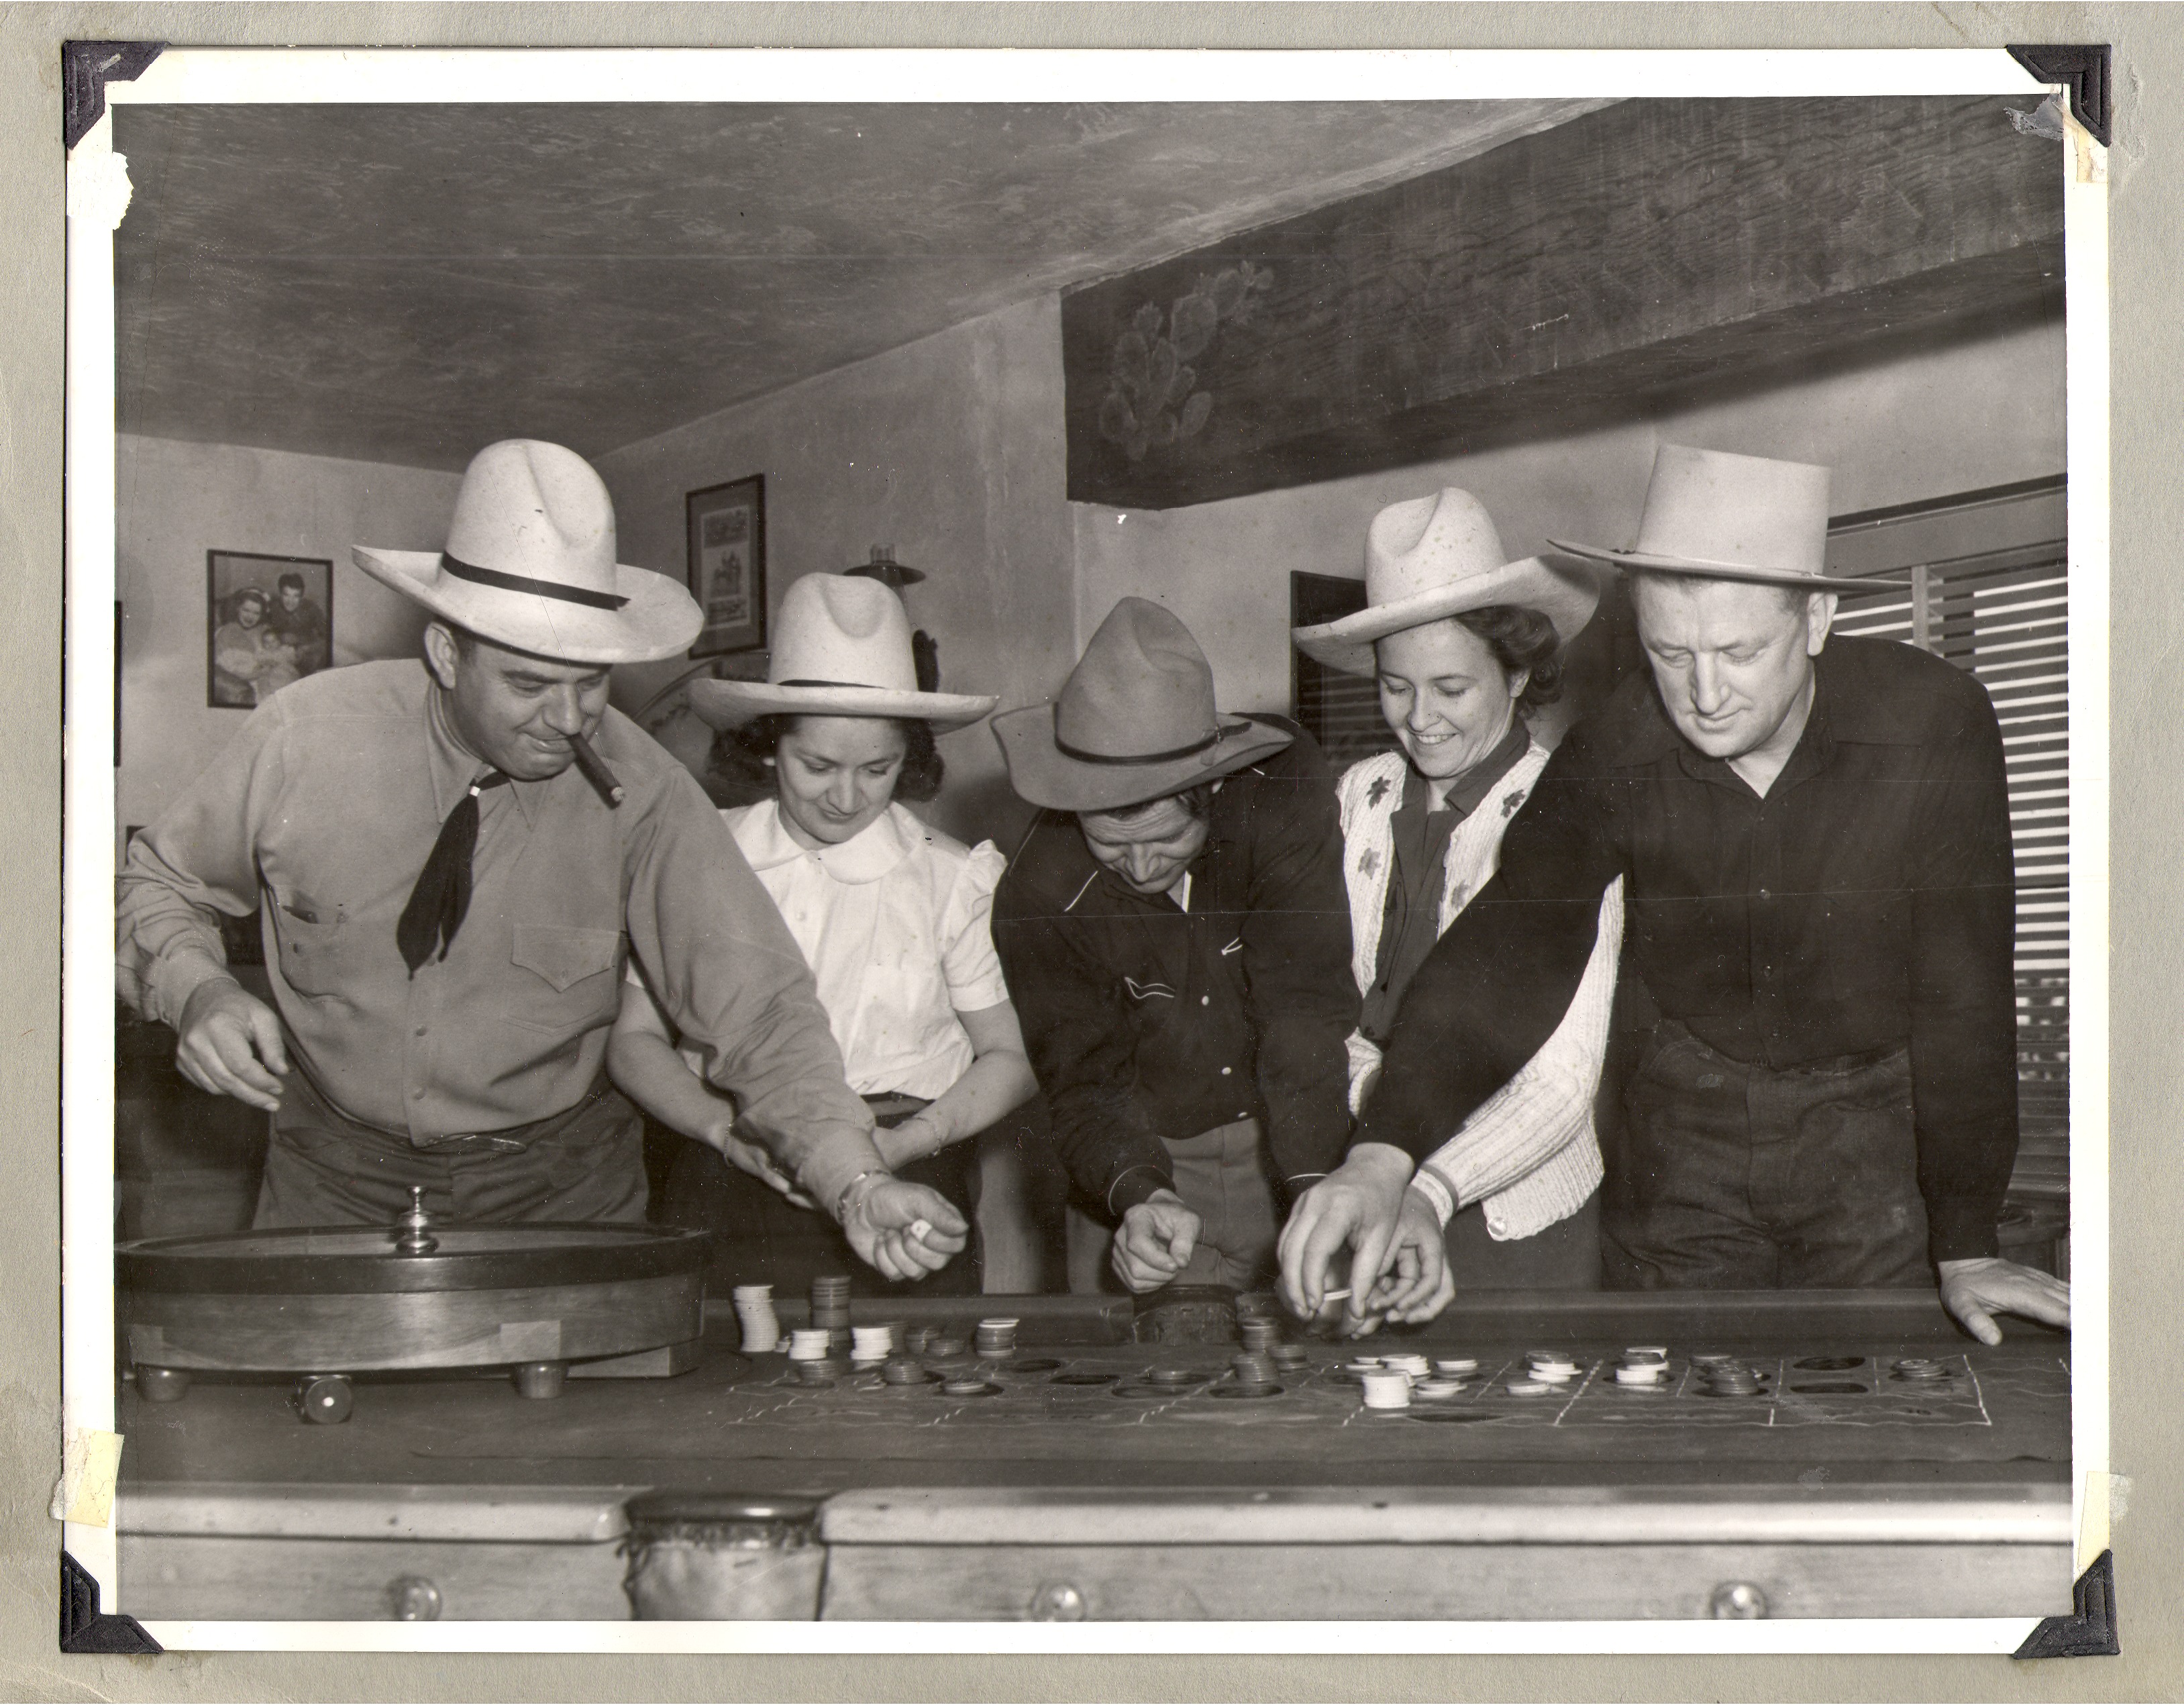 Rex Bell (center with head down) and two couples in the game room at the ranch: photographic print